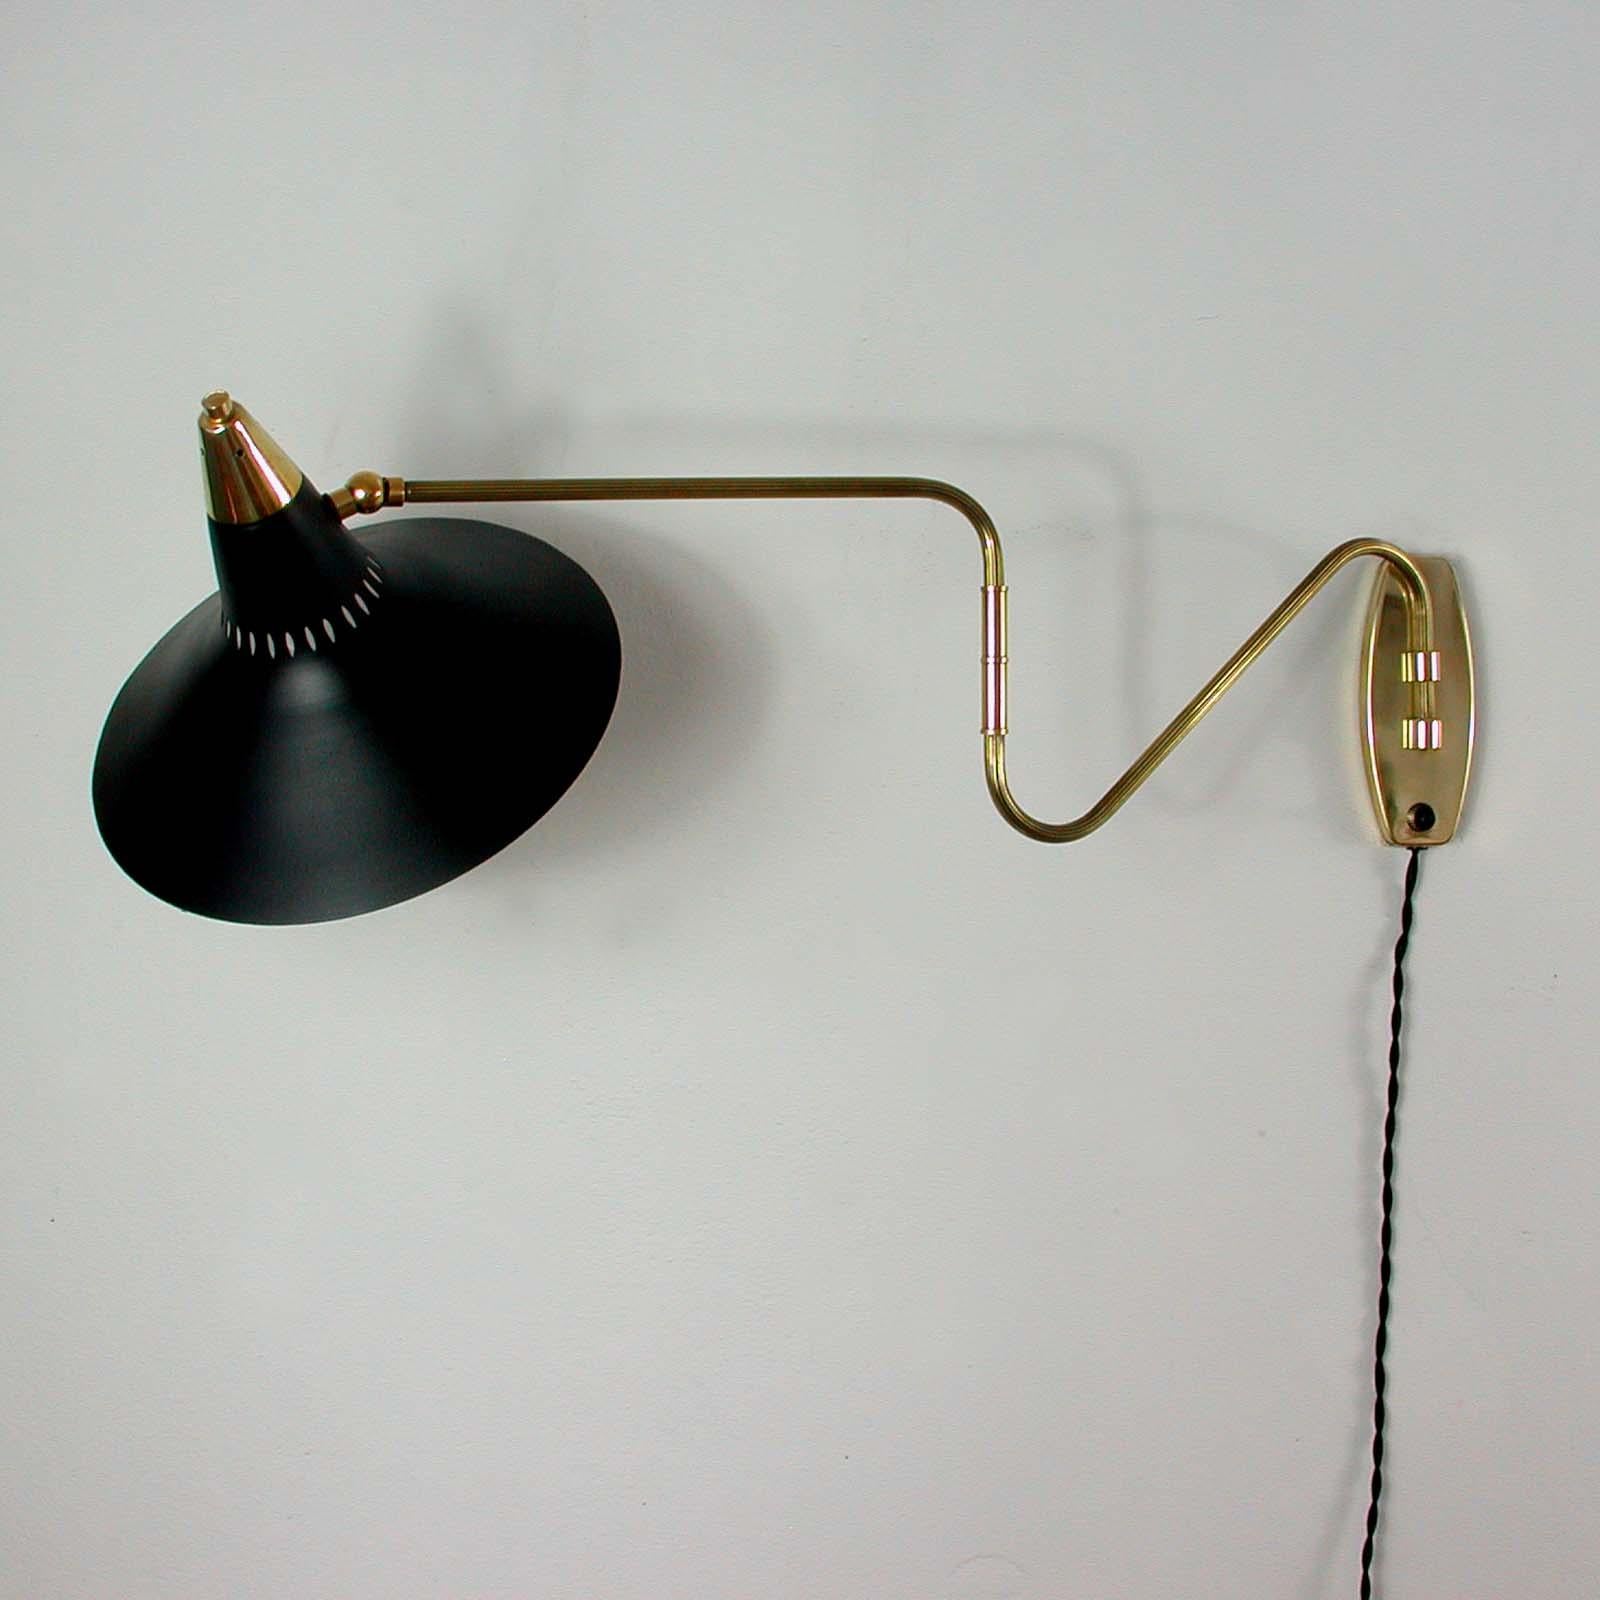 Metal Midcentury Swedish Black and Brass Articulating Wall Light Sconce, 1950s